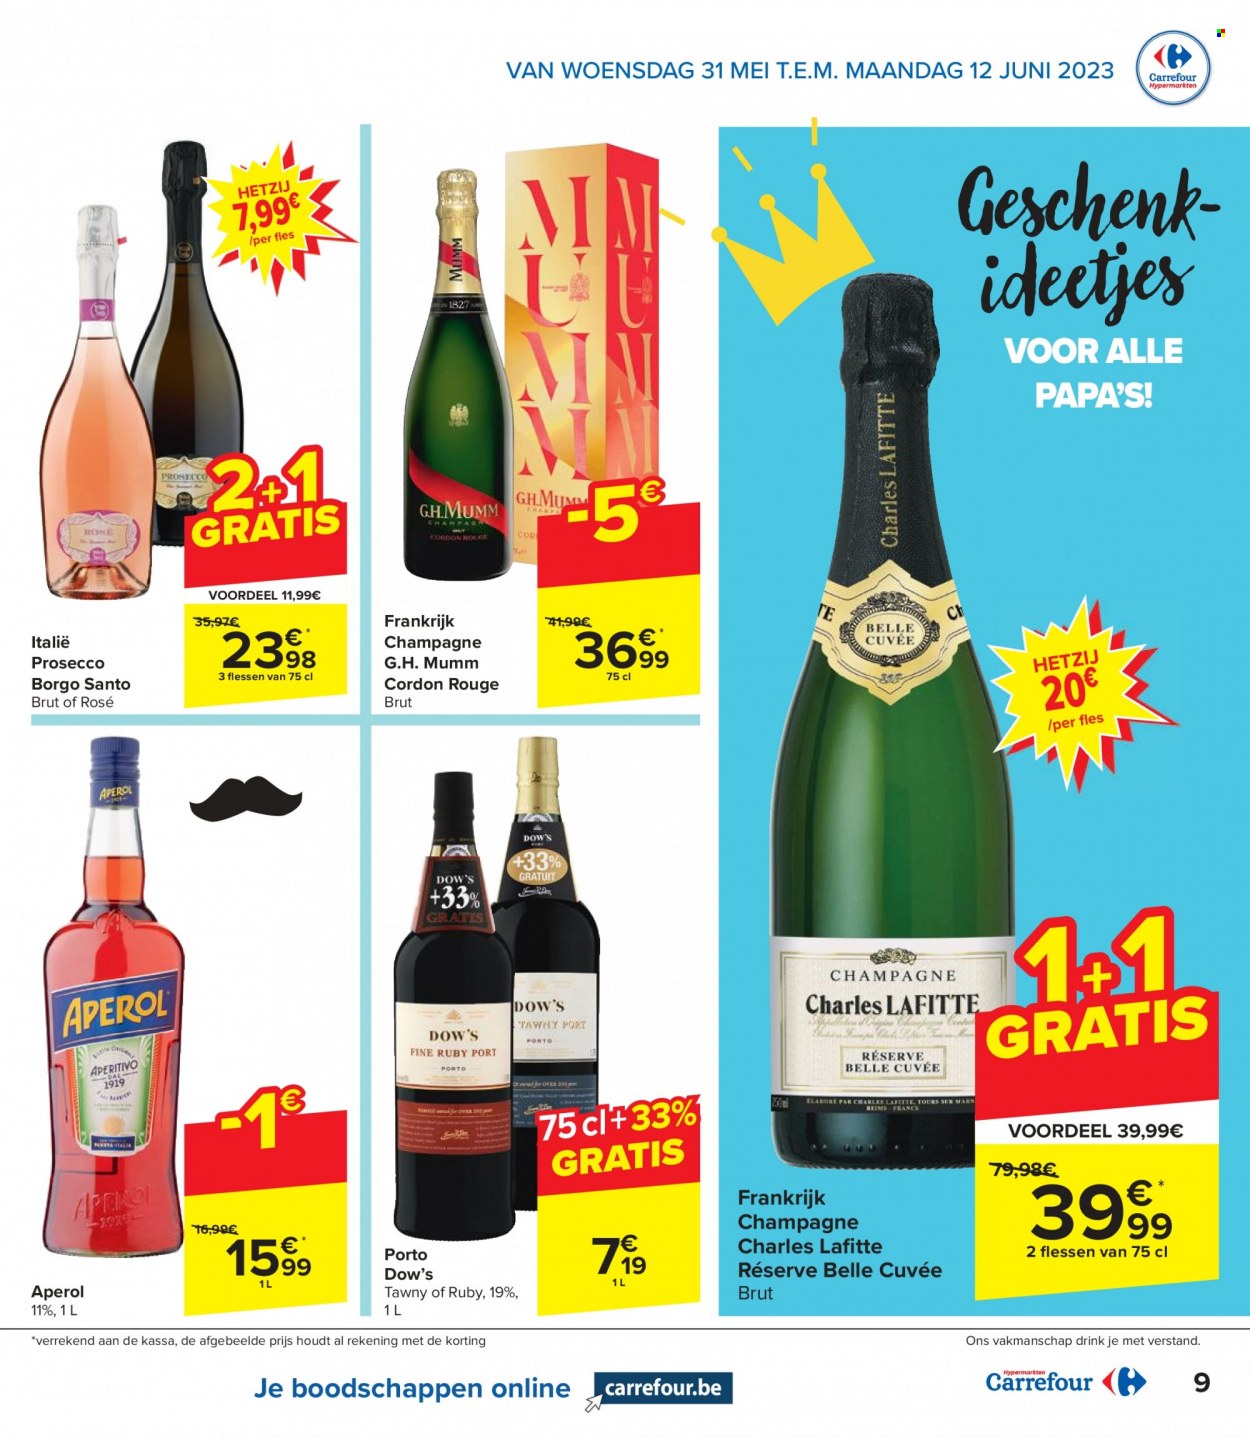 Catalogue Carrefour hypermarkt - 31.5.2023 - 12.6.2023. Page 9.